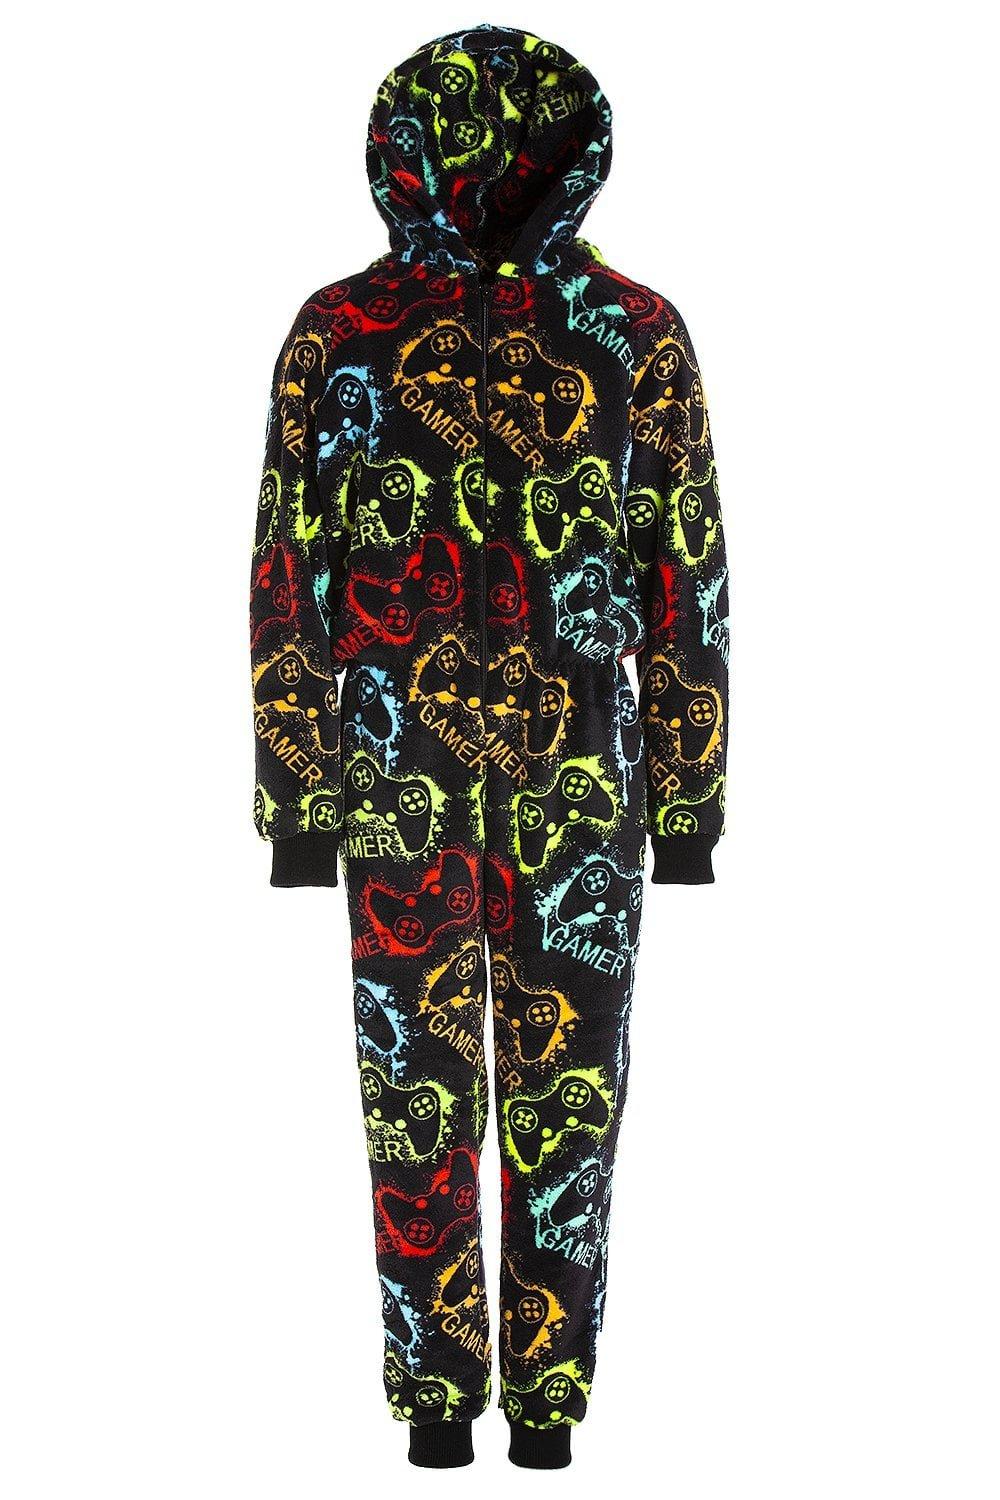 Supersoft Multicoloured Gamer Print Hooded All In One Onesie